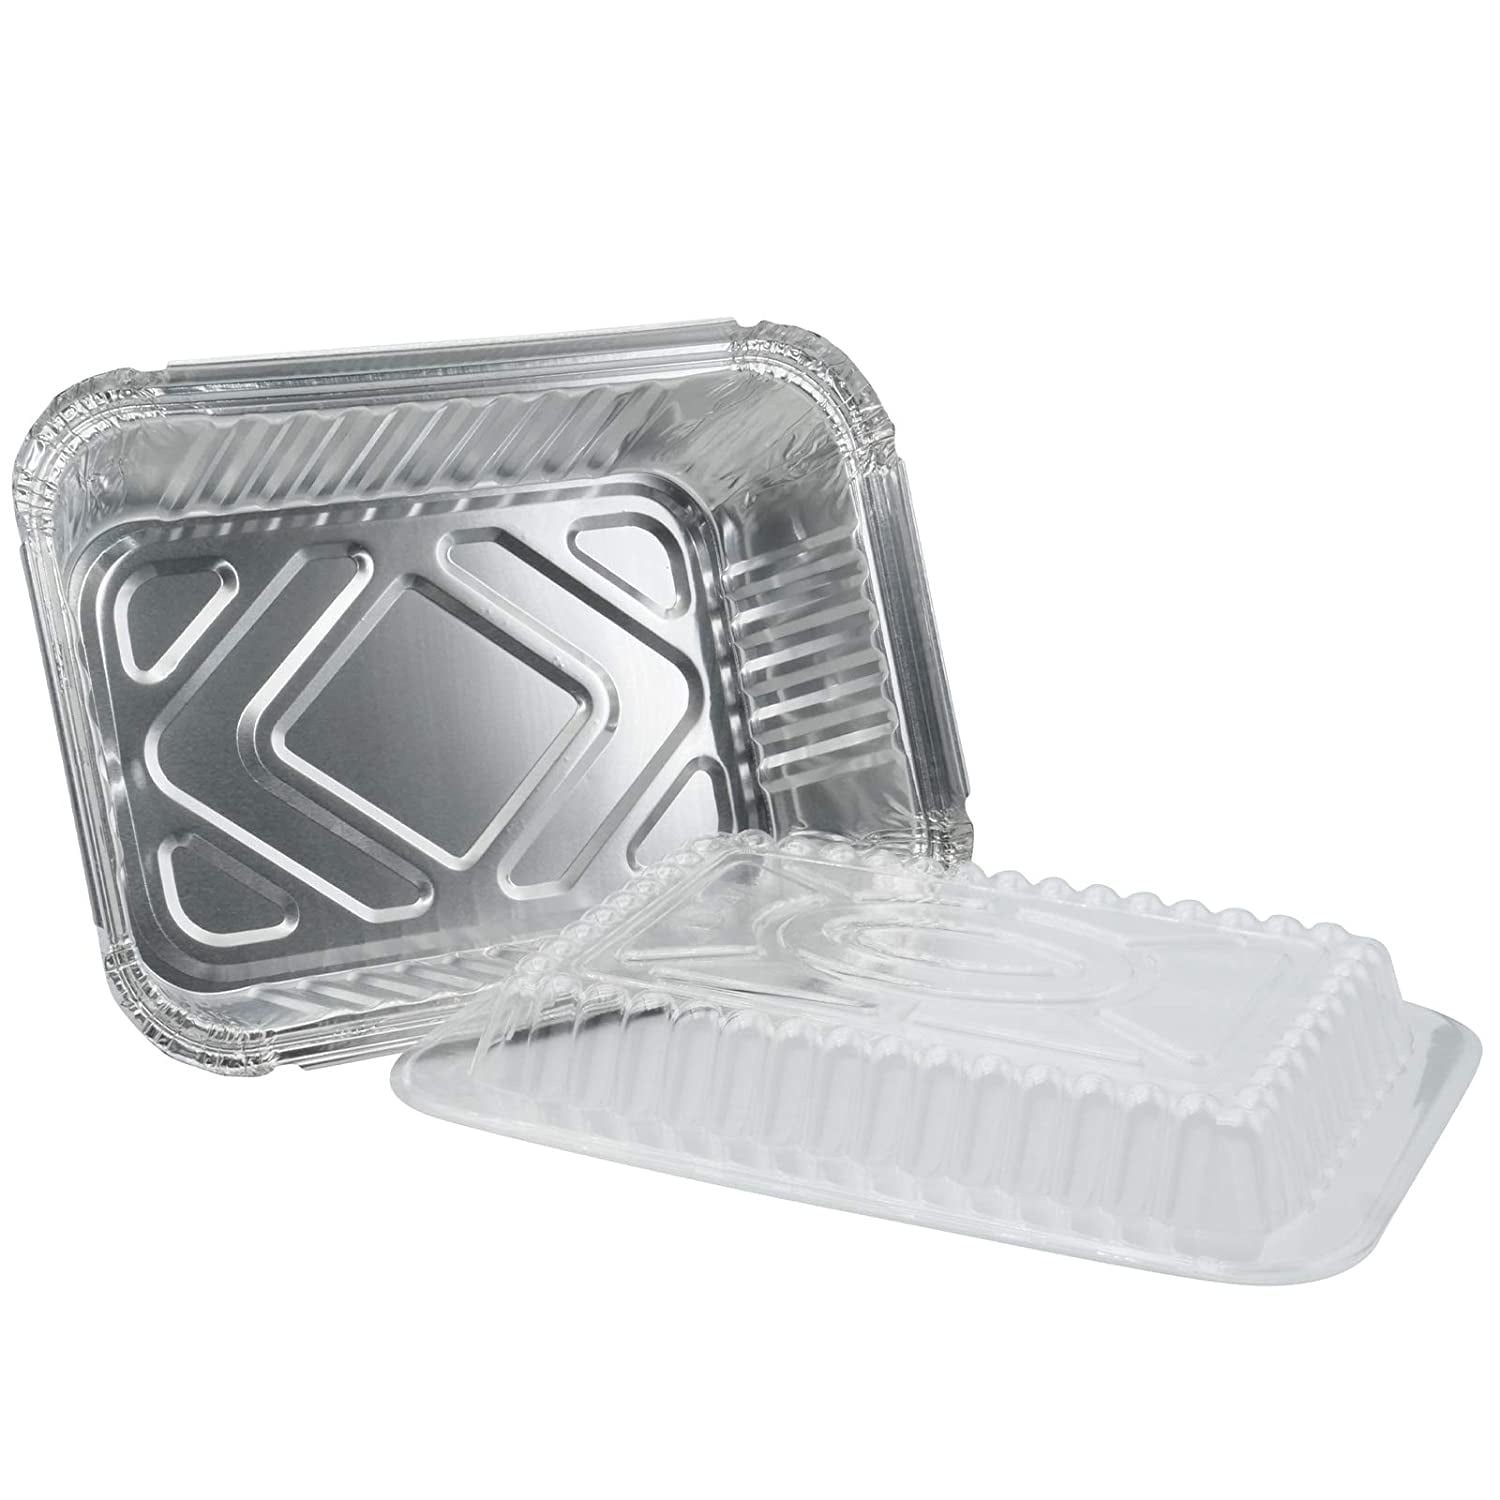 Displastible Disposable Aluminum Pans with Lids Freezer and Oven